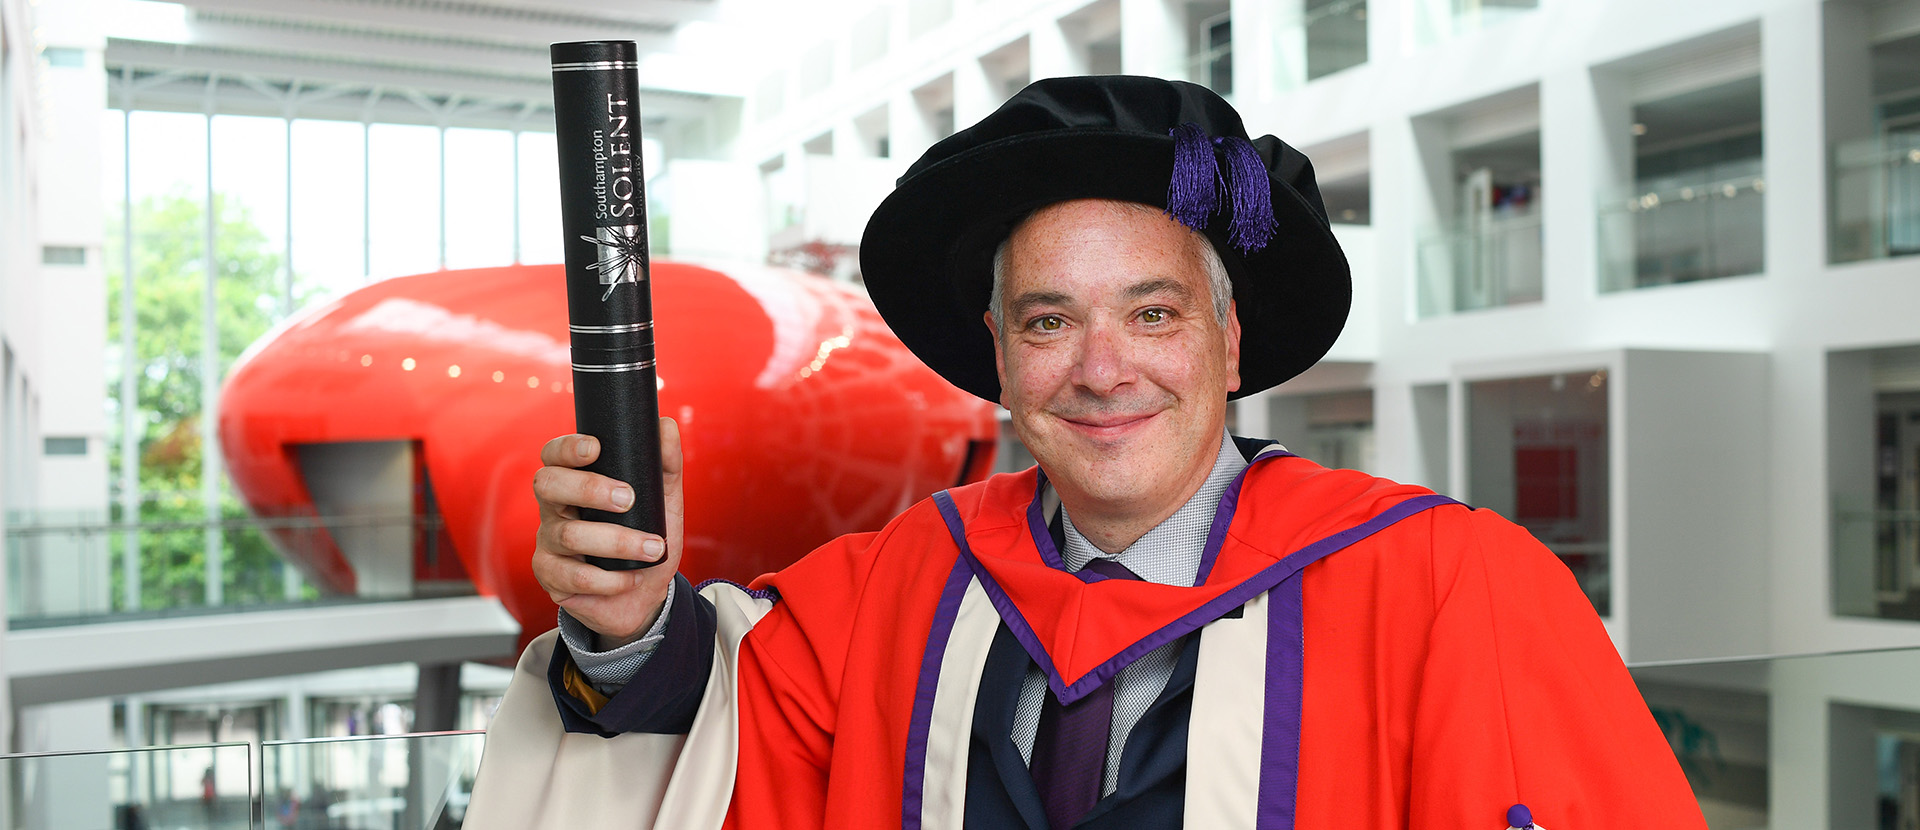 Michael Coyle awarded the honorary degree